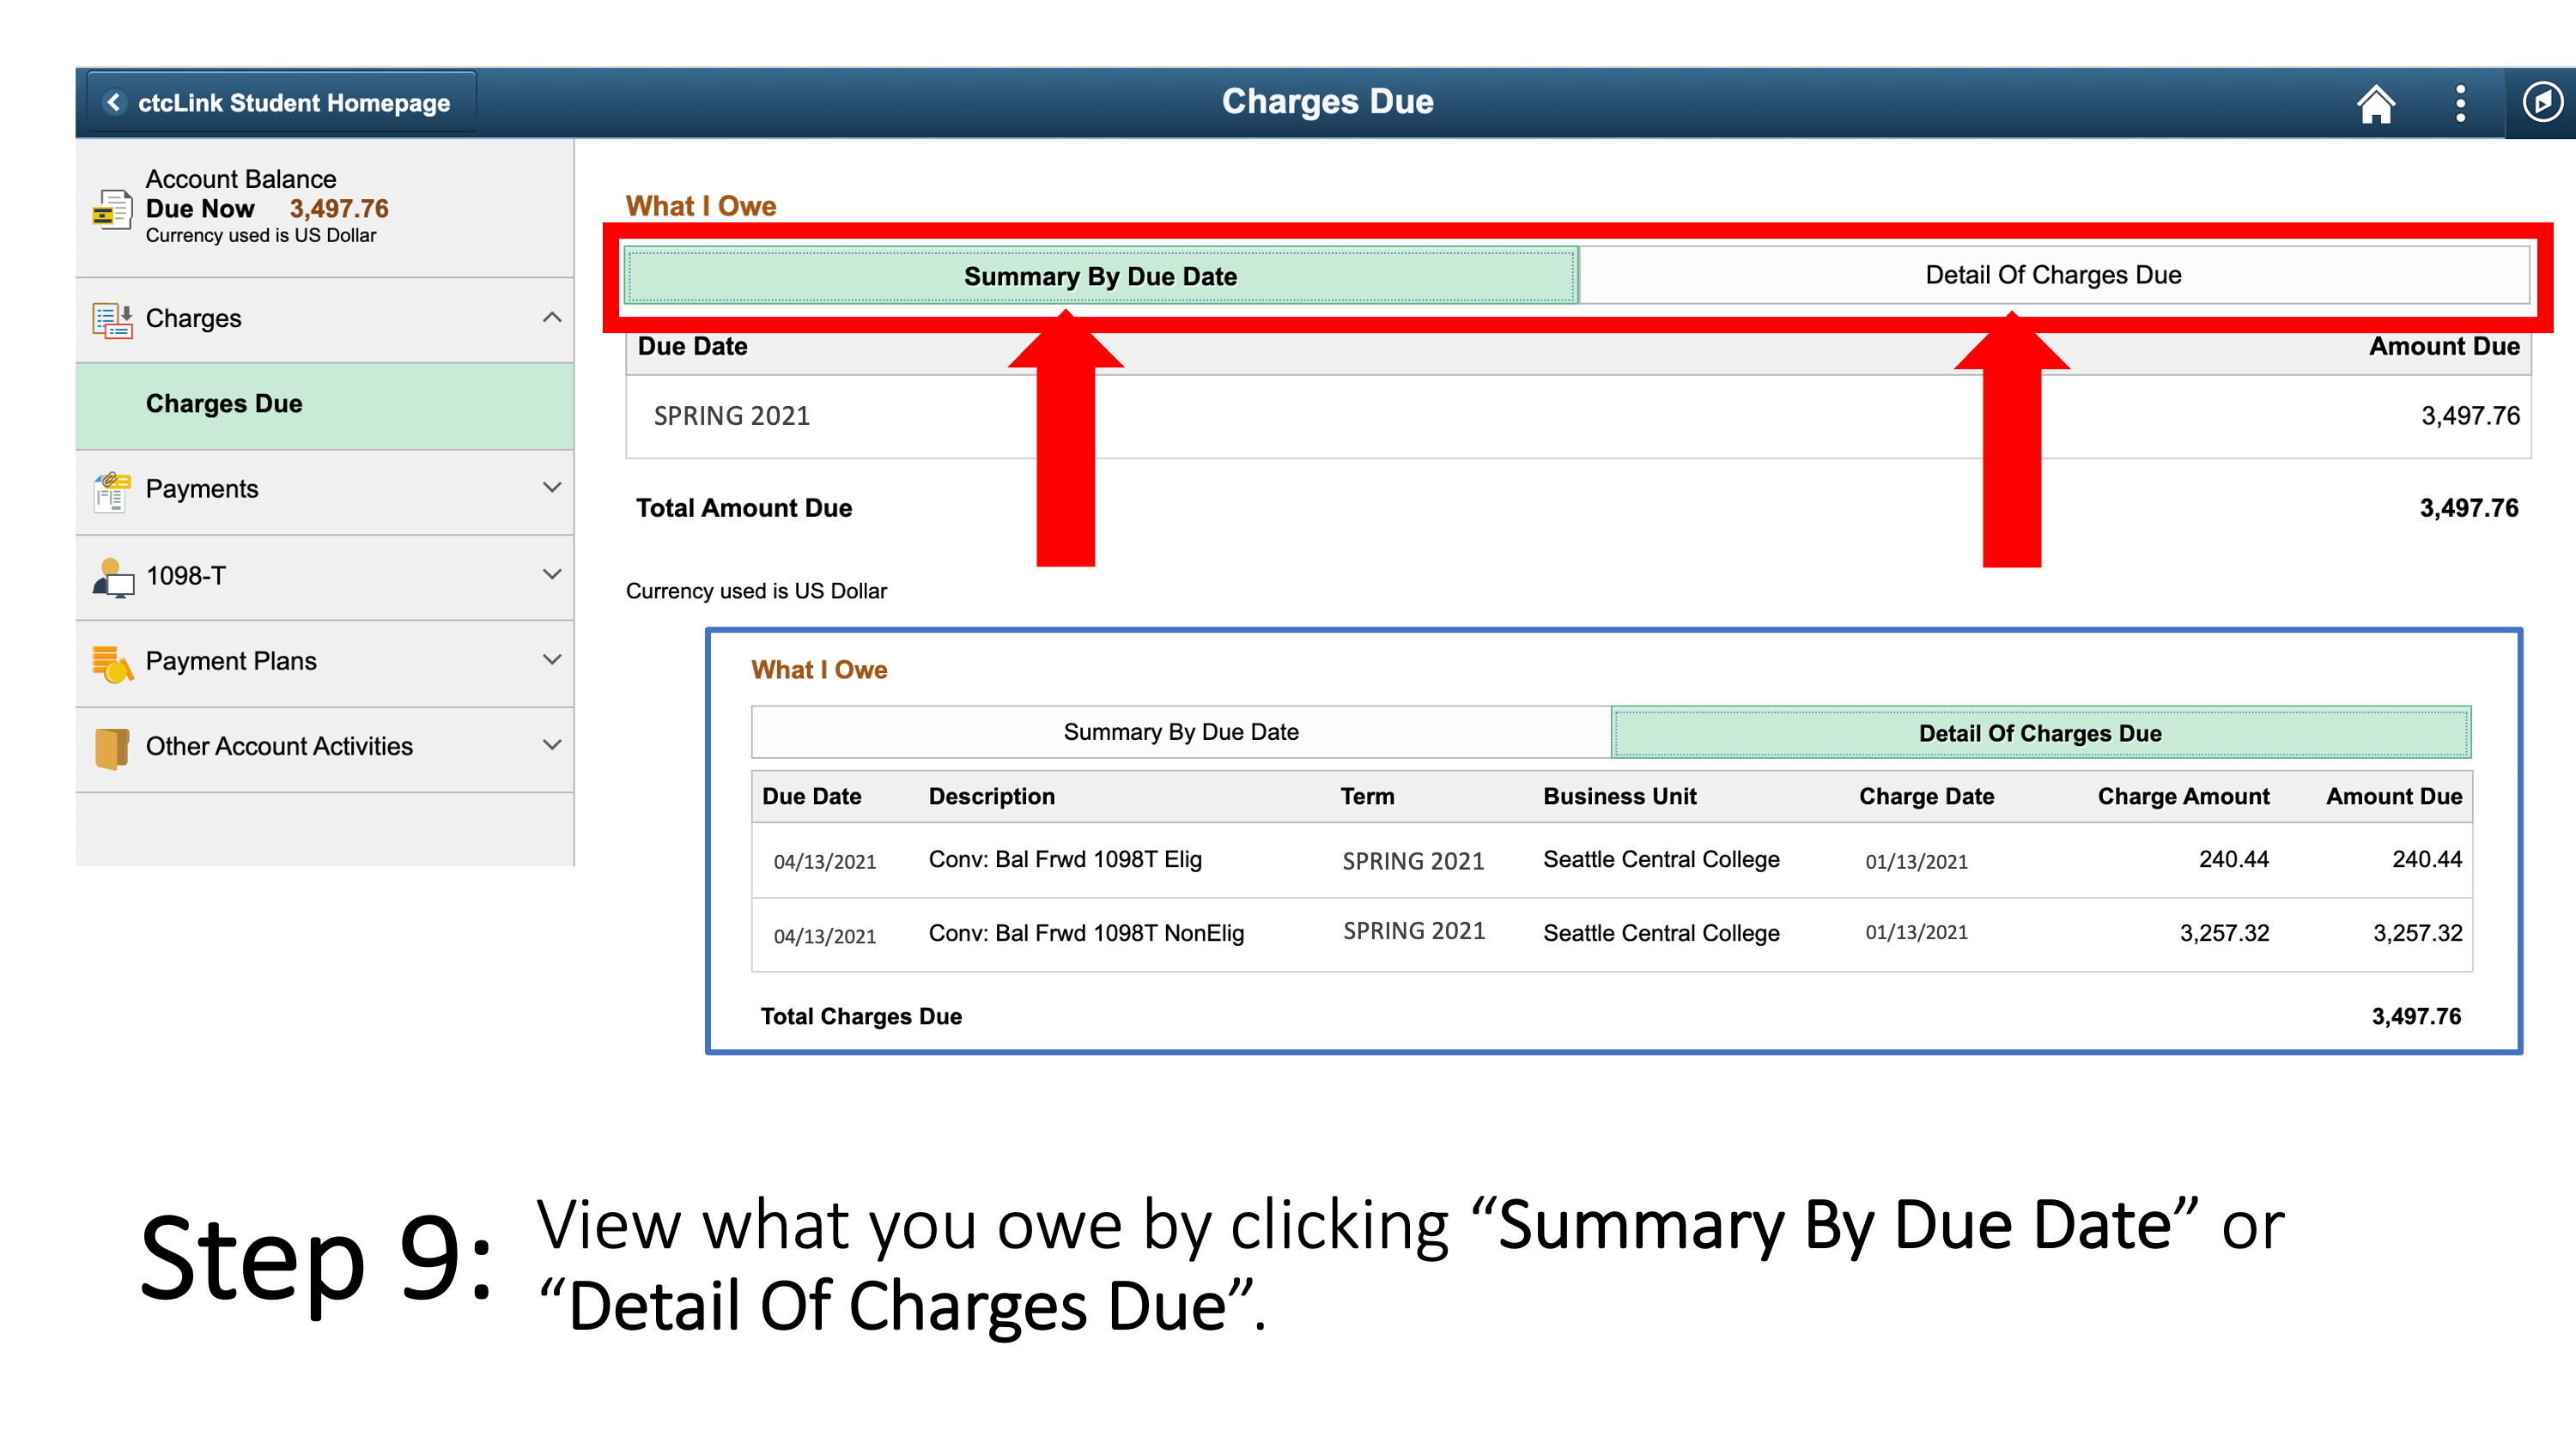 View what you owe by clicking “Summary By Due Date” or “Detail Of Charges Due”.